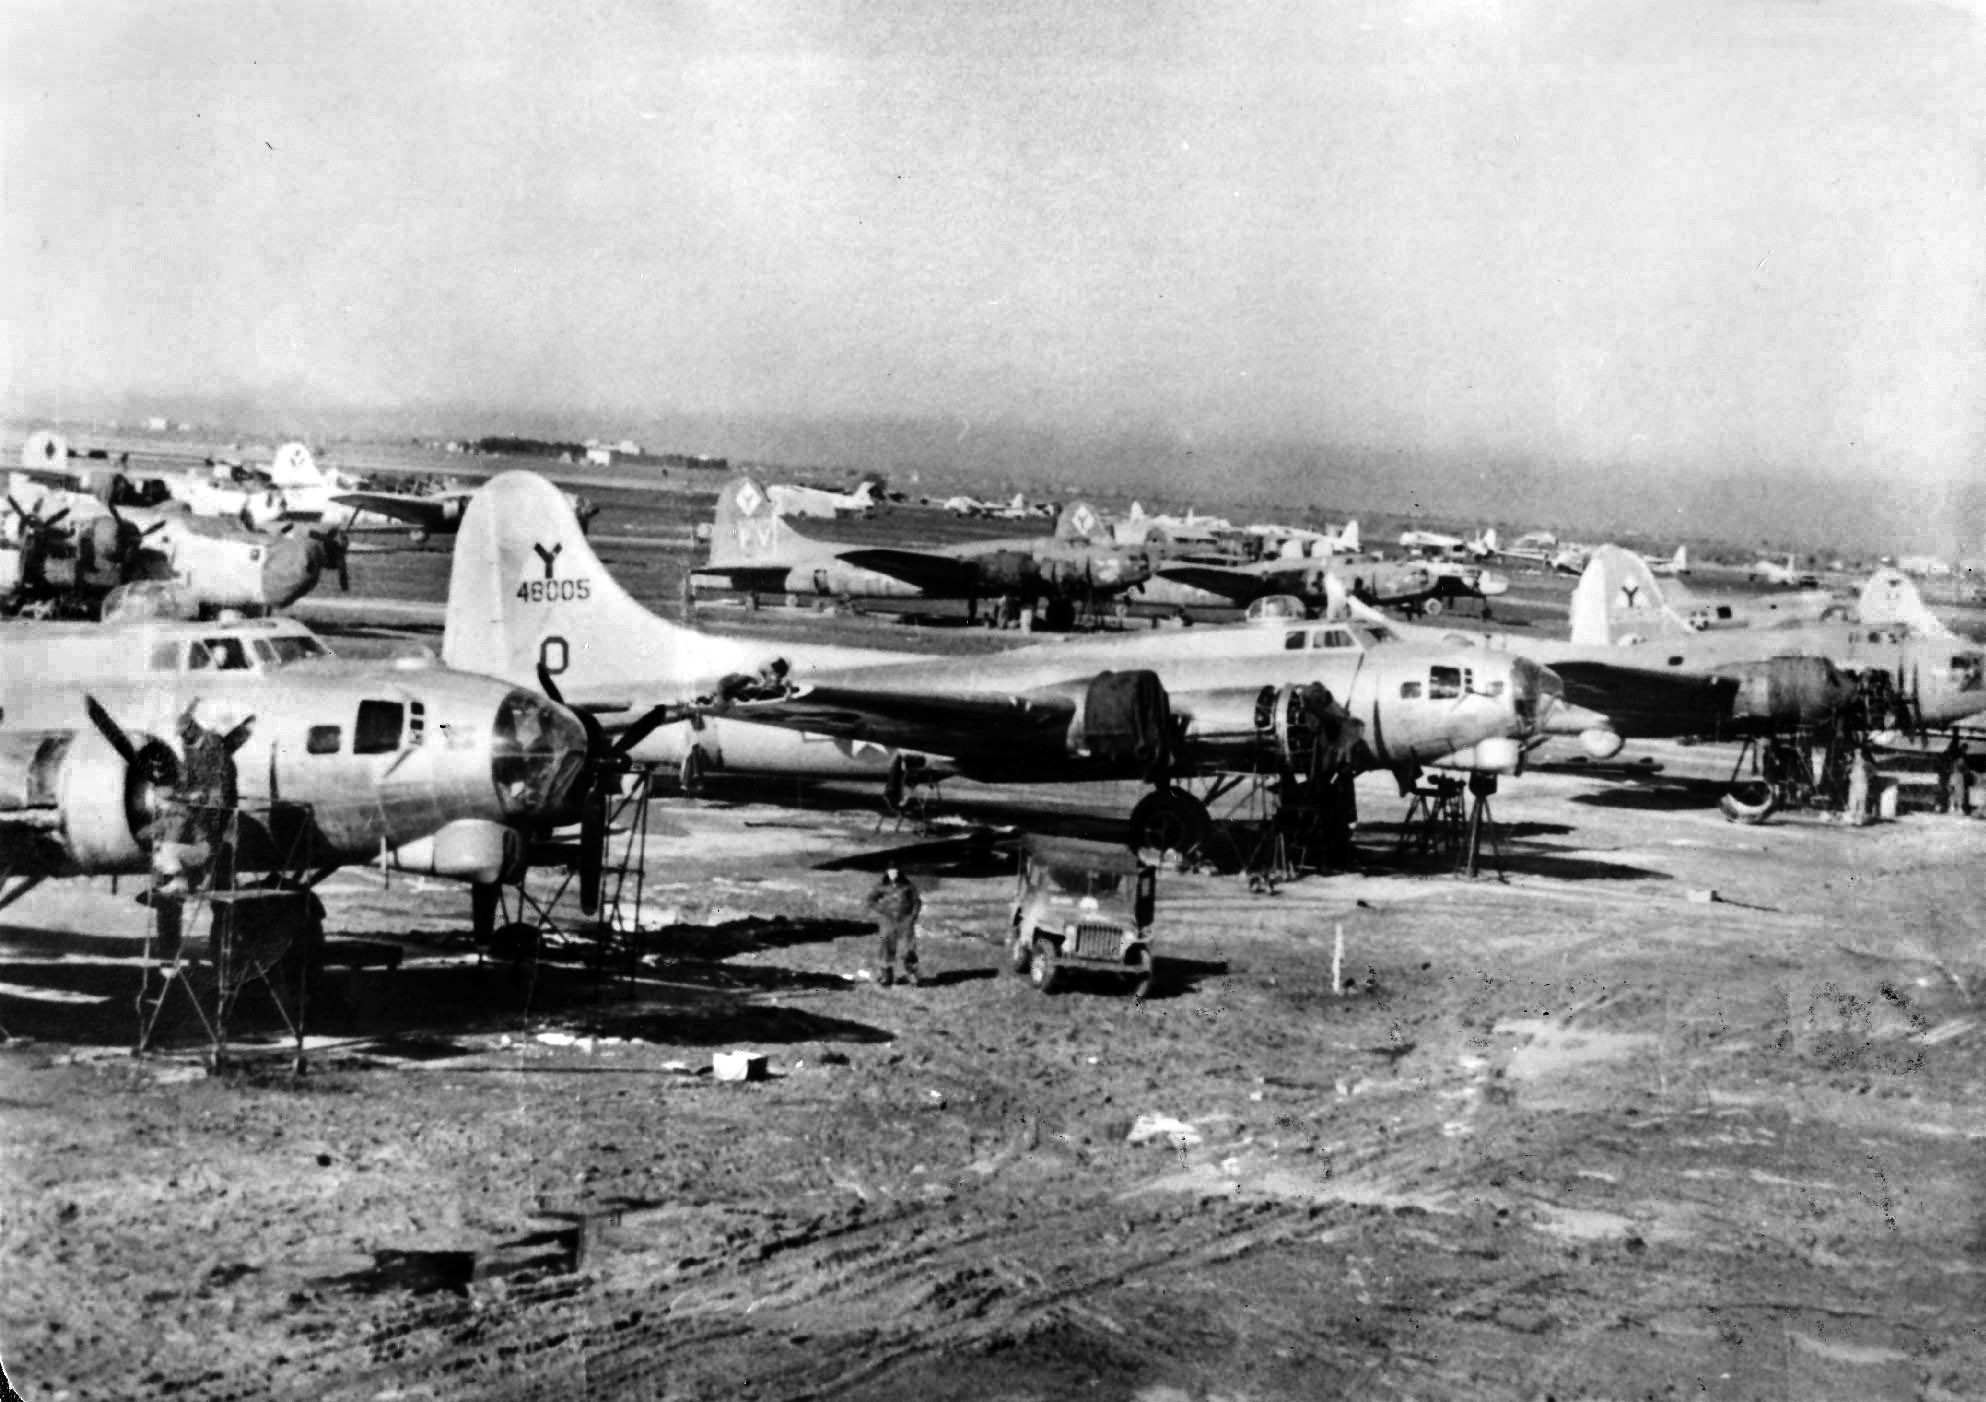 The 97th Bomb Group B-17s parked in the mud at Amendola Field in Foggia, Italy, where the living conditions were primitive and unpleasant for the crews but were heaven compared to their bombing missions.